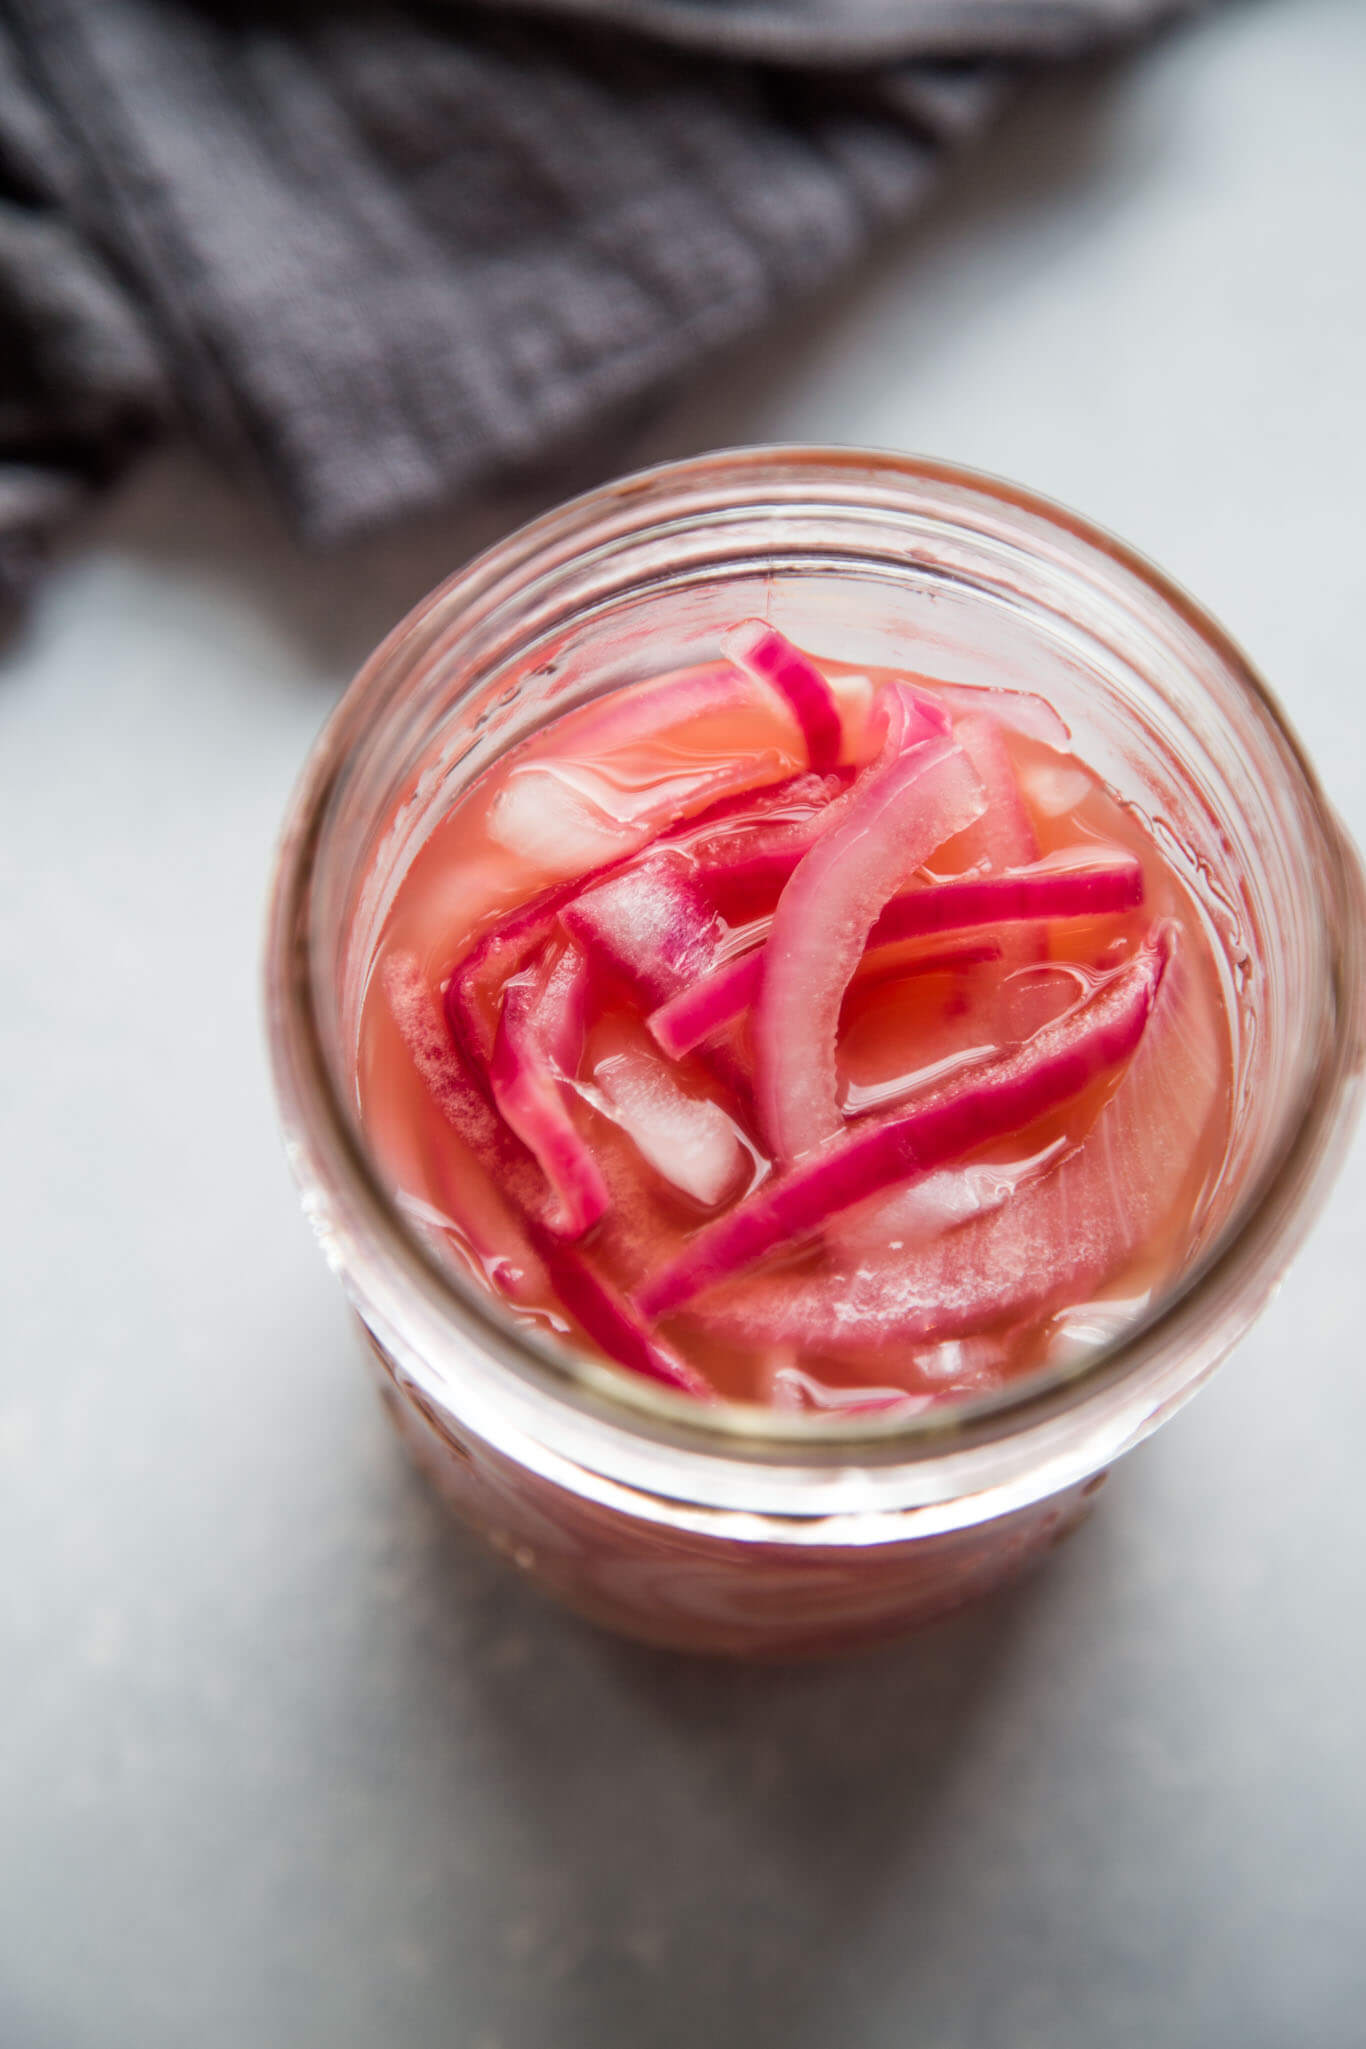 Overhead shot of jar of pickled onions next to dark grey dish cloth.